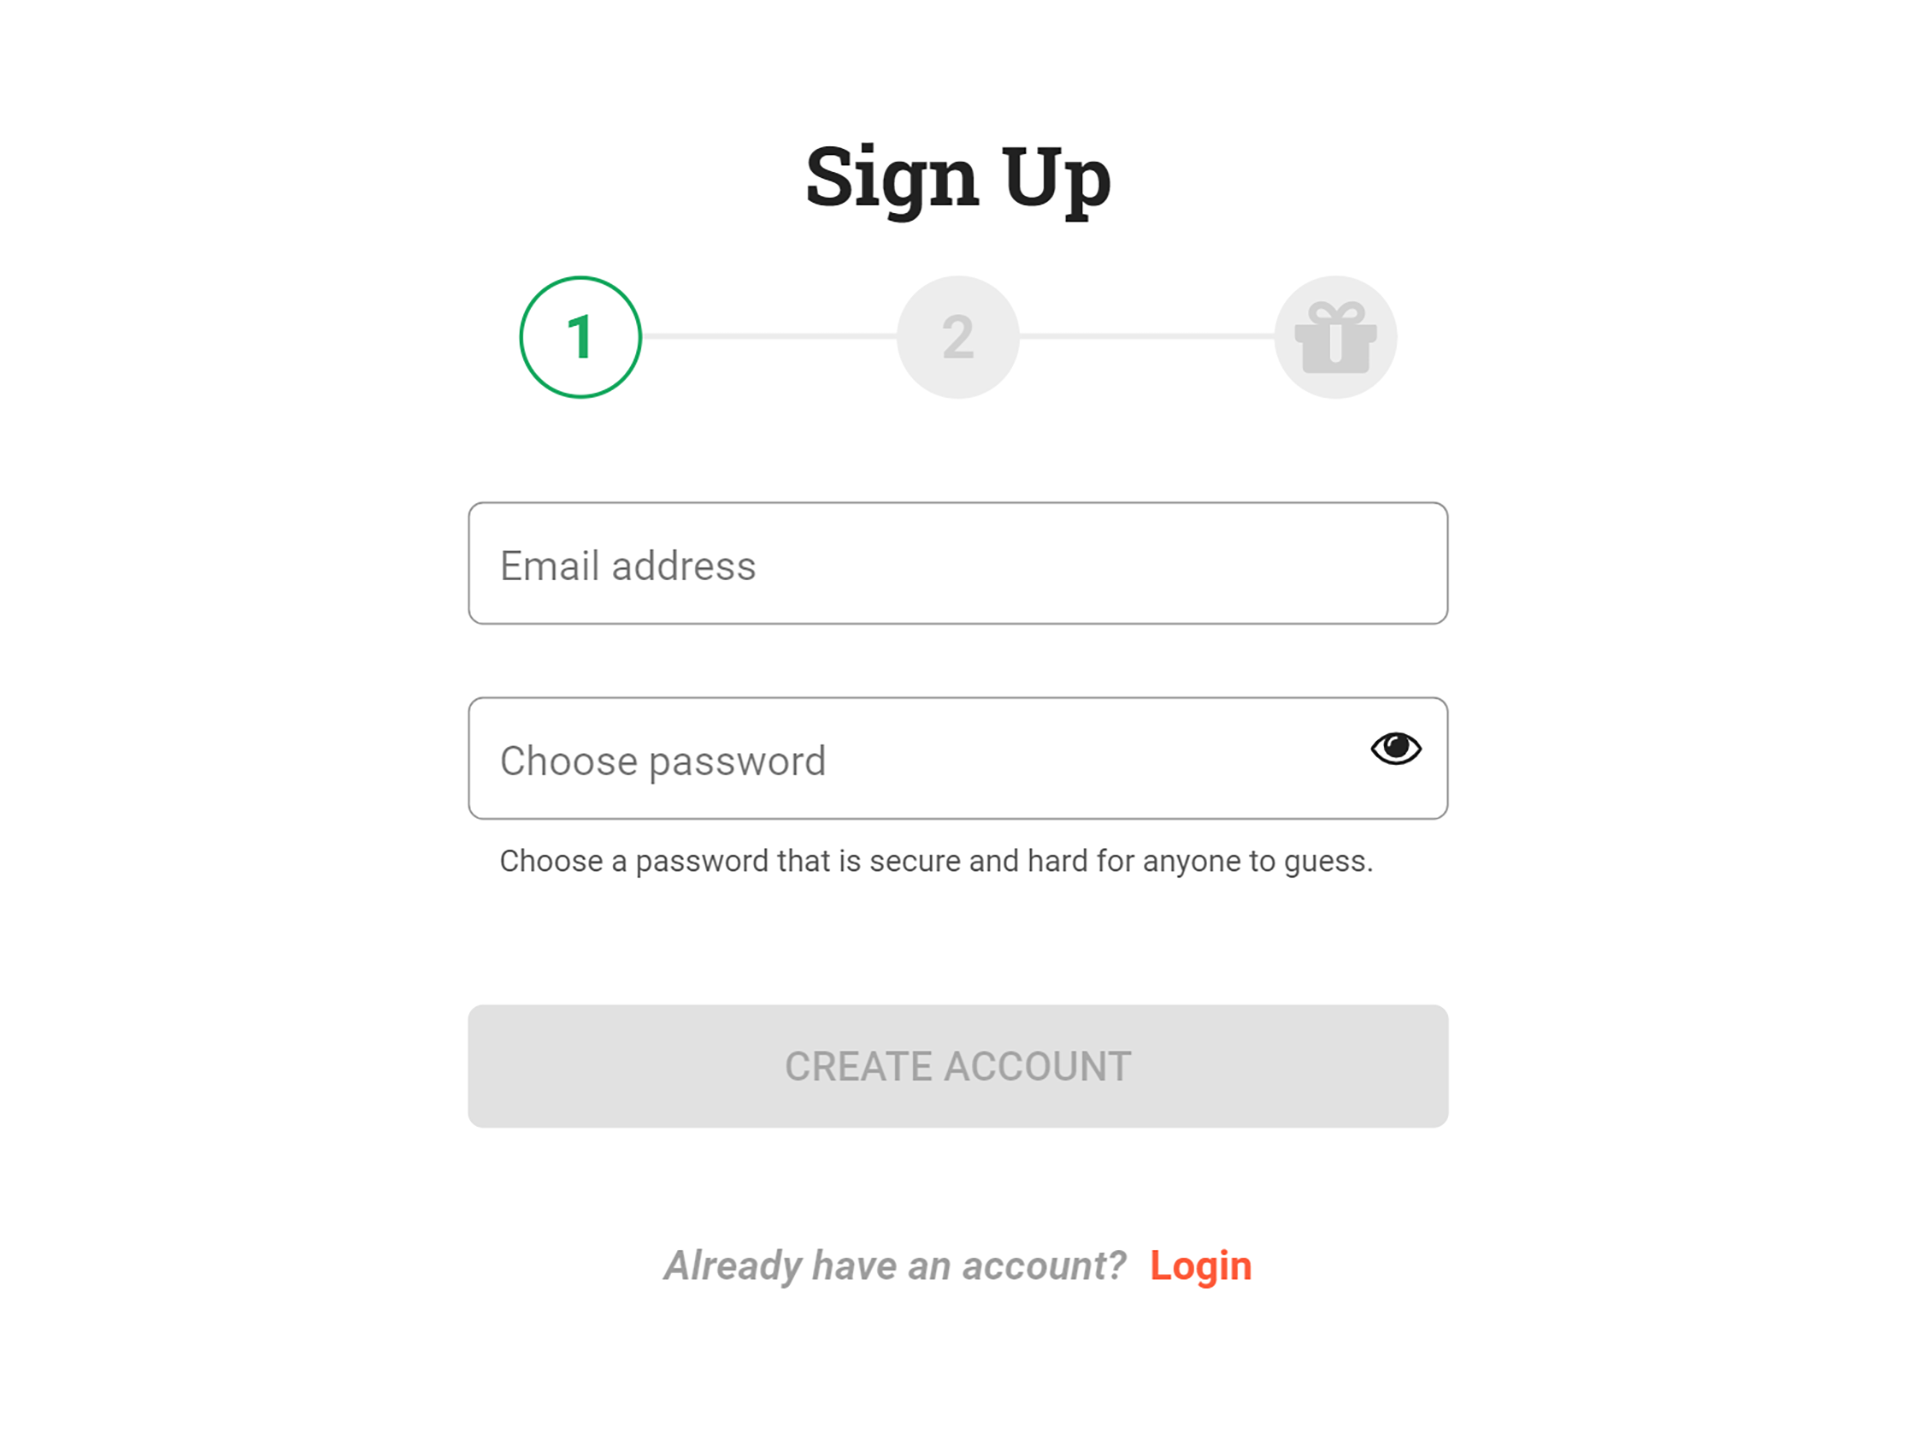 Enter your email and come up with a password to log into your Leovegas account.